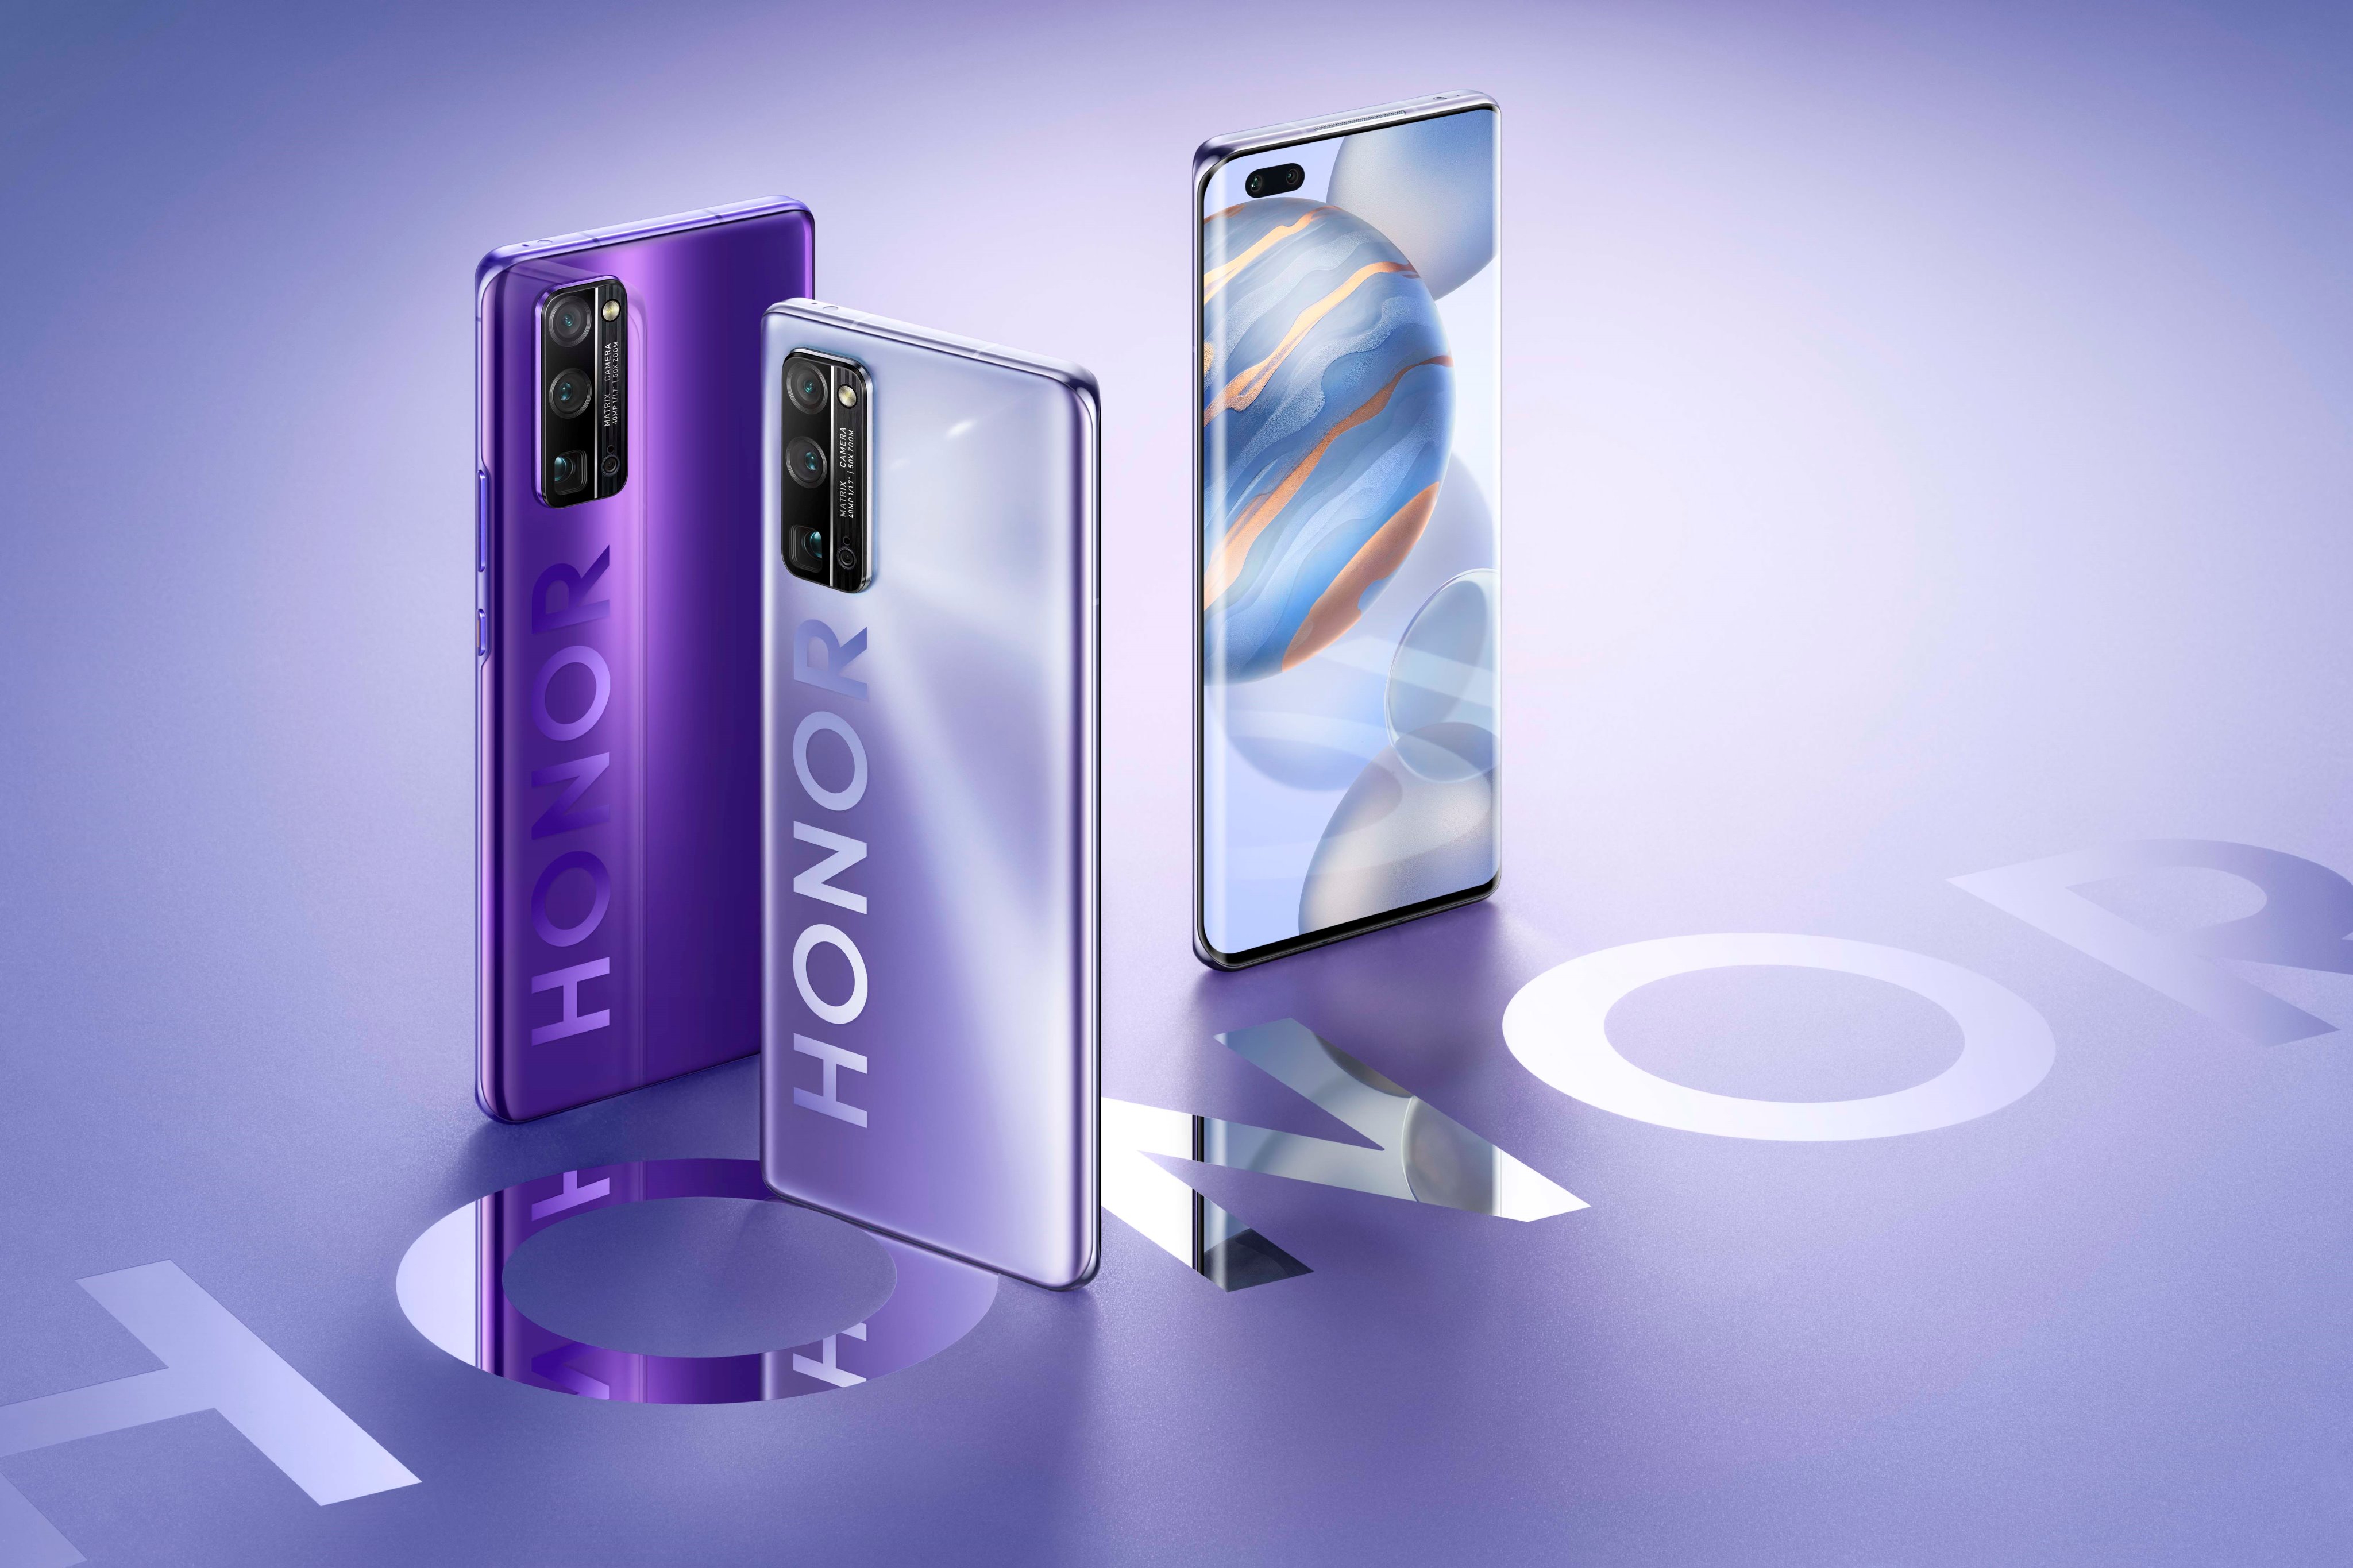 honor-30-pro-launches-with-kirin-990-and-50-mp-imx700-debuts-in